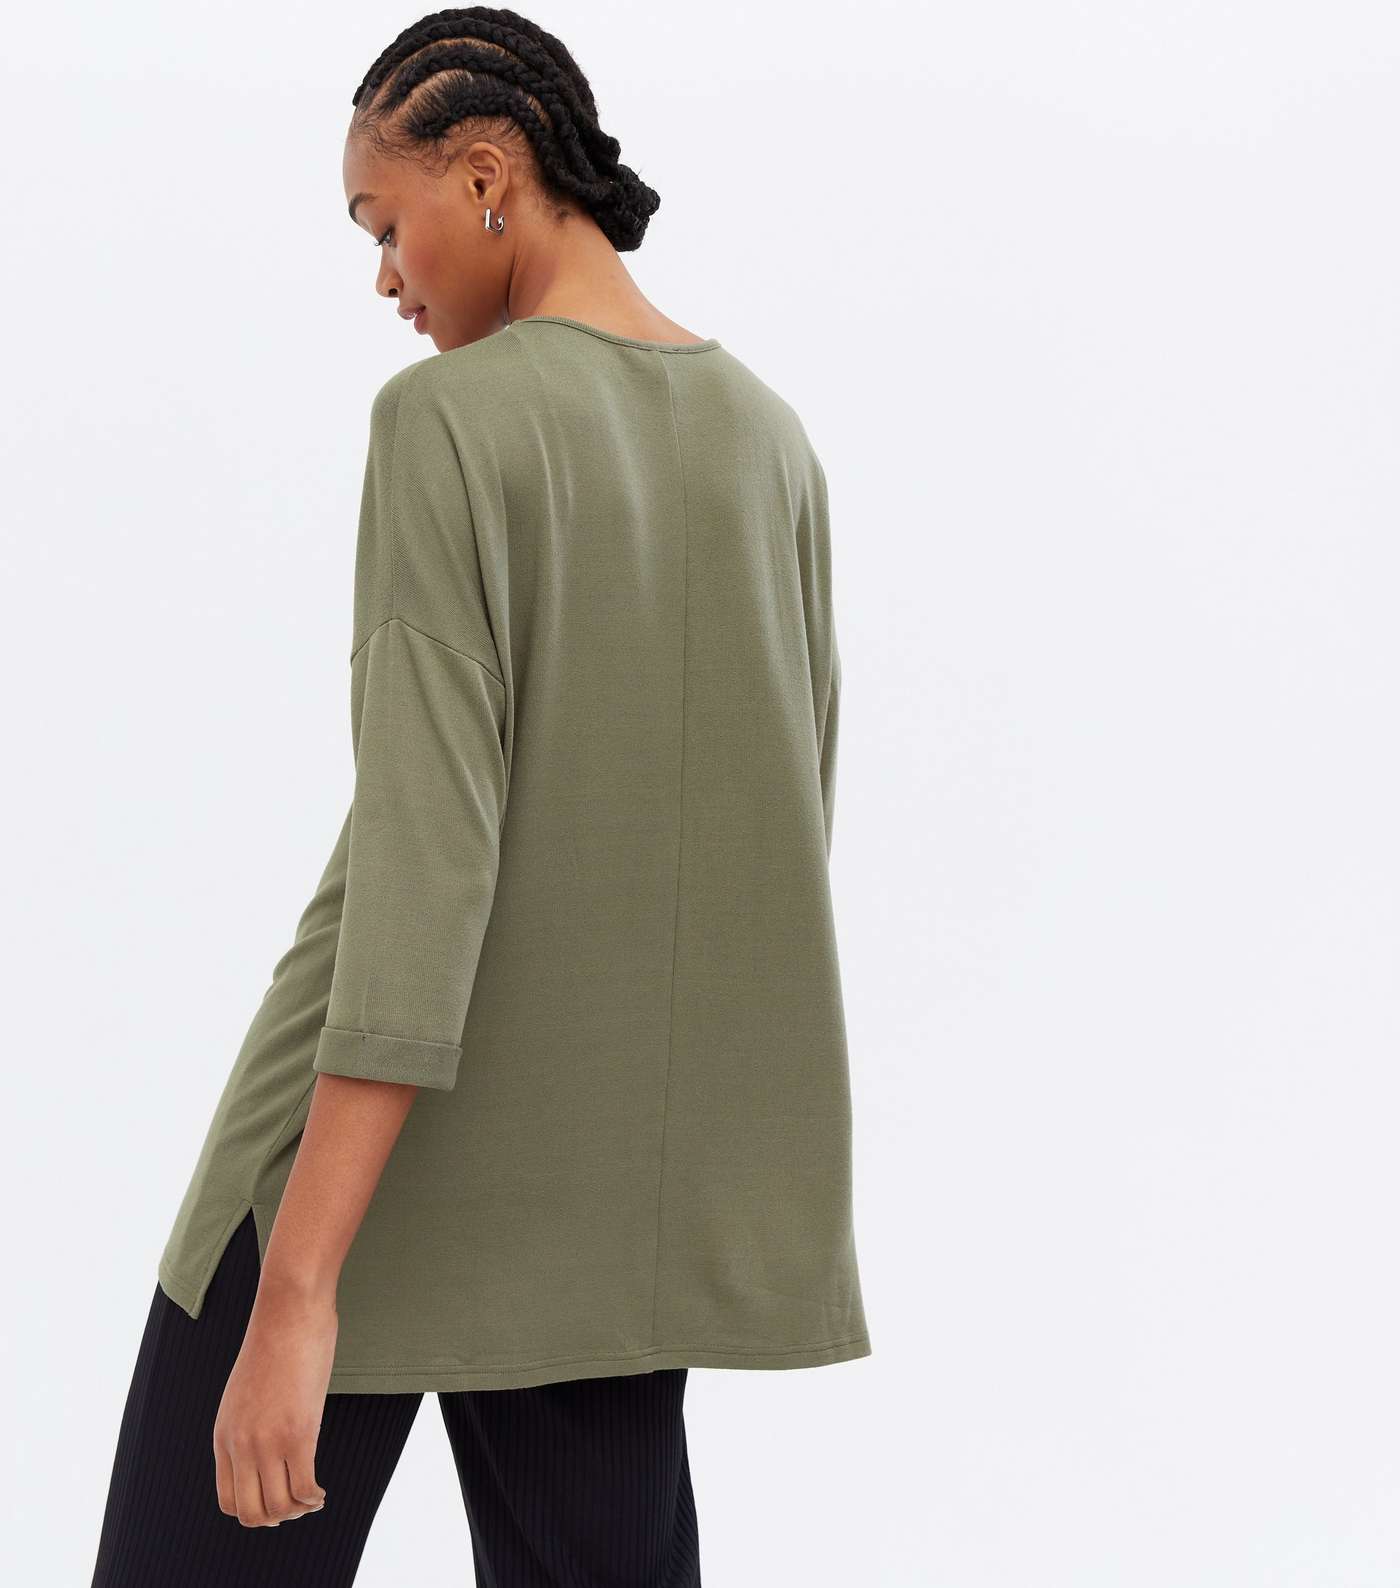 Tall 2 Pack Khaki and Black Fine Knit 3/4 Sleeve Long Tops Image 4